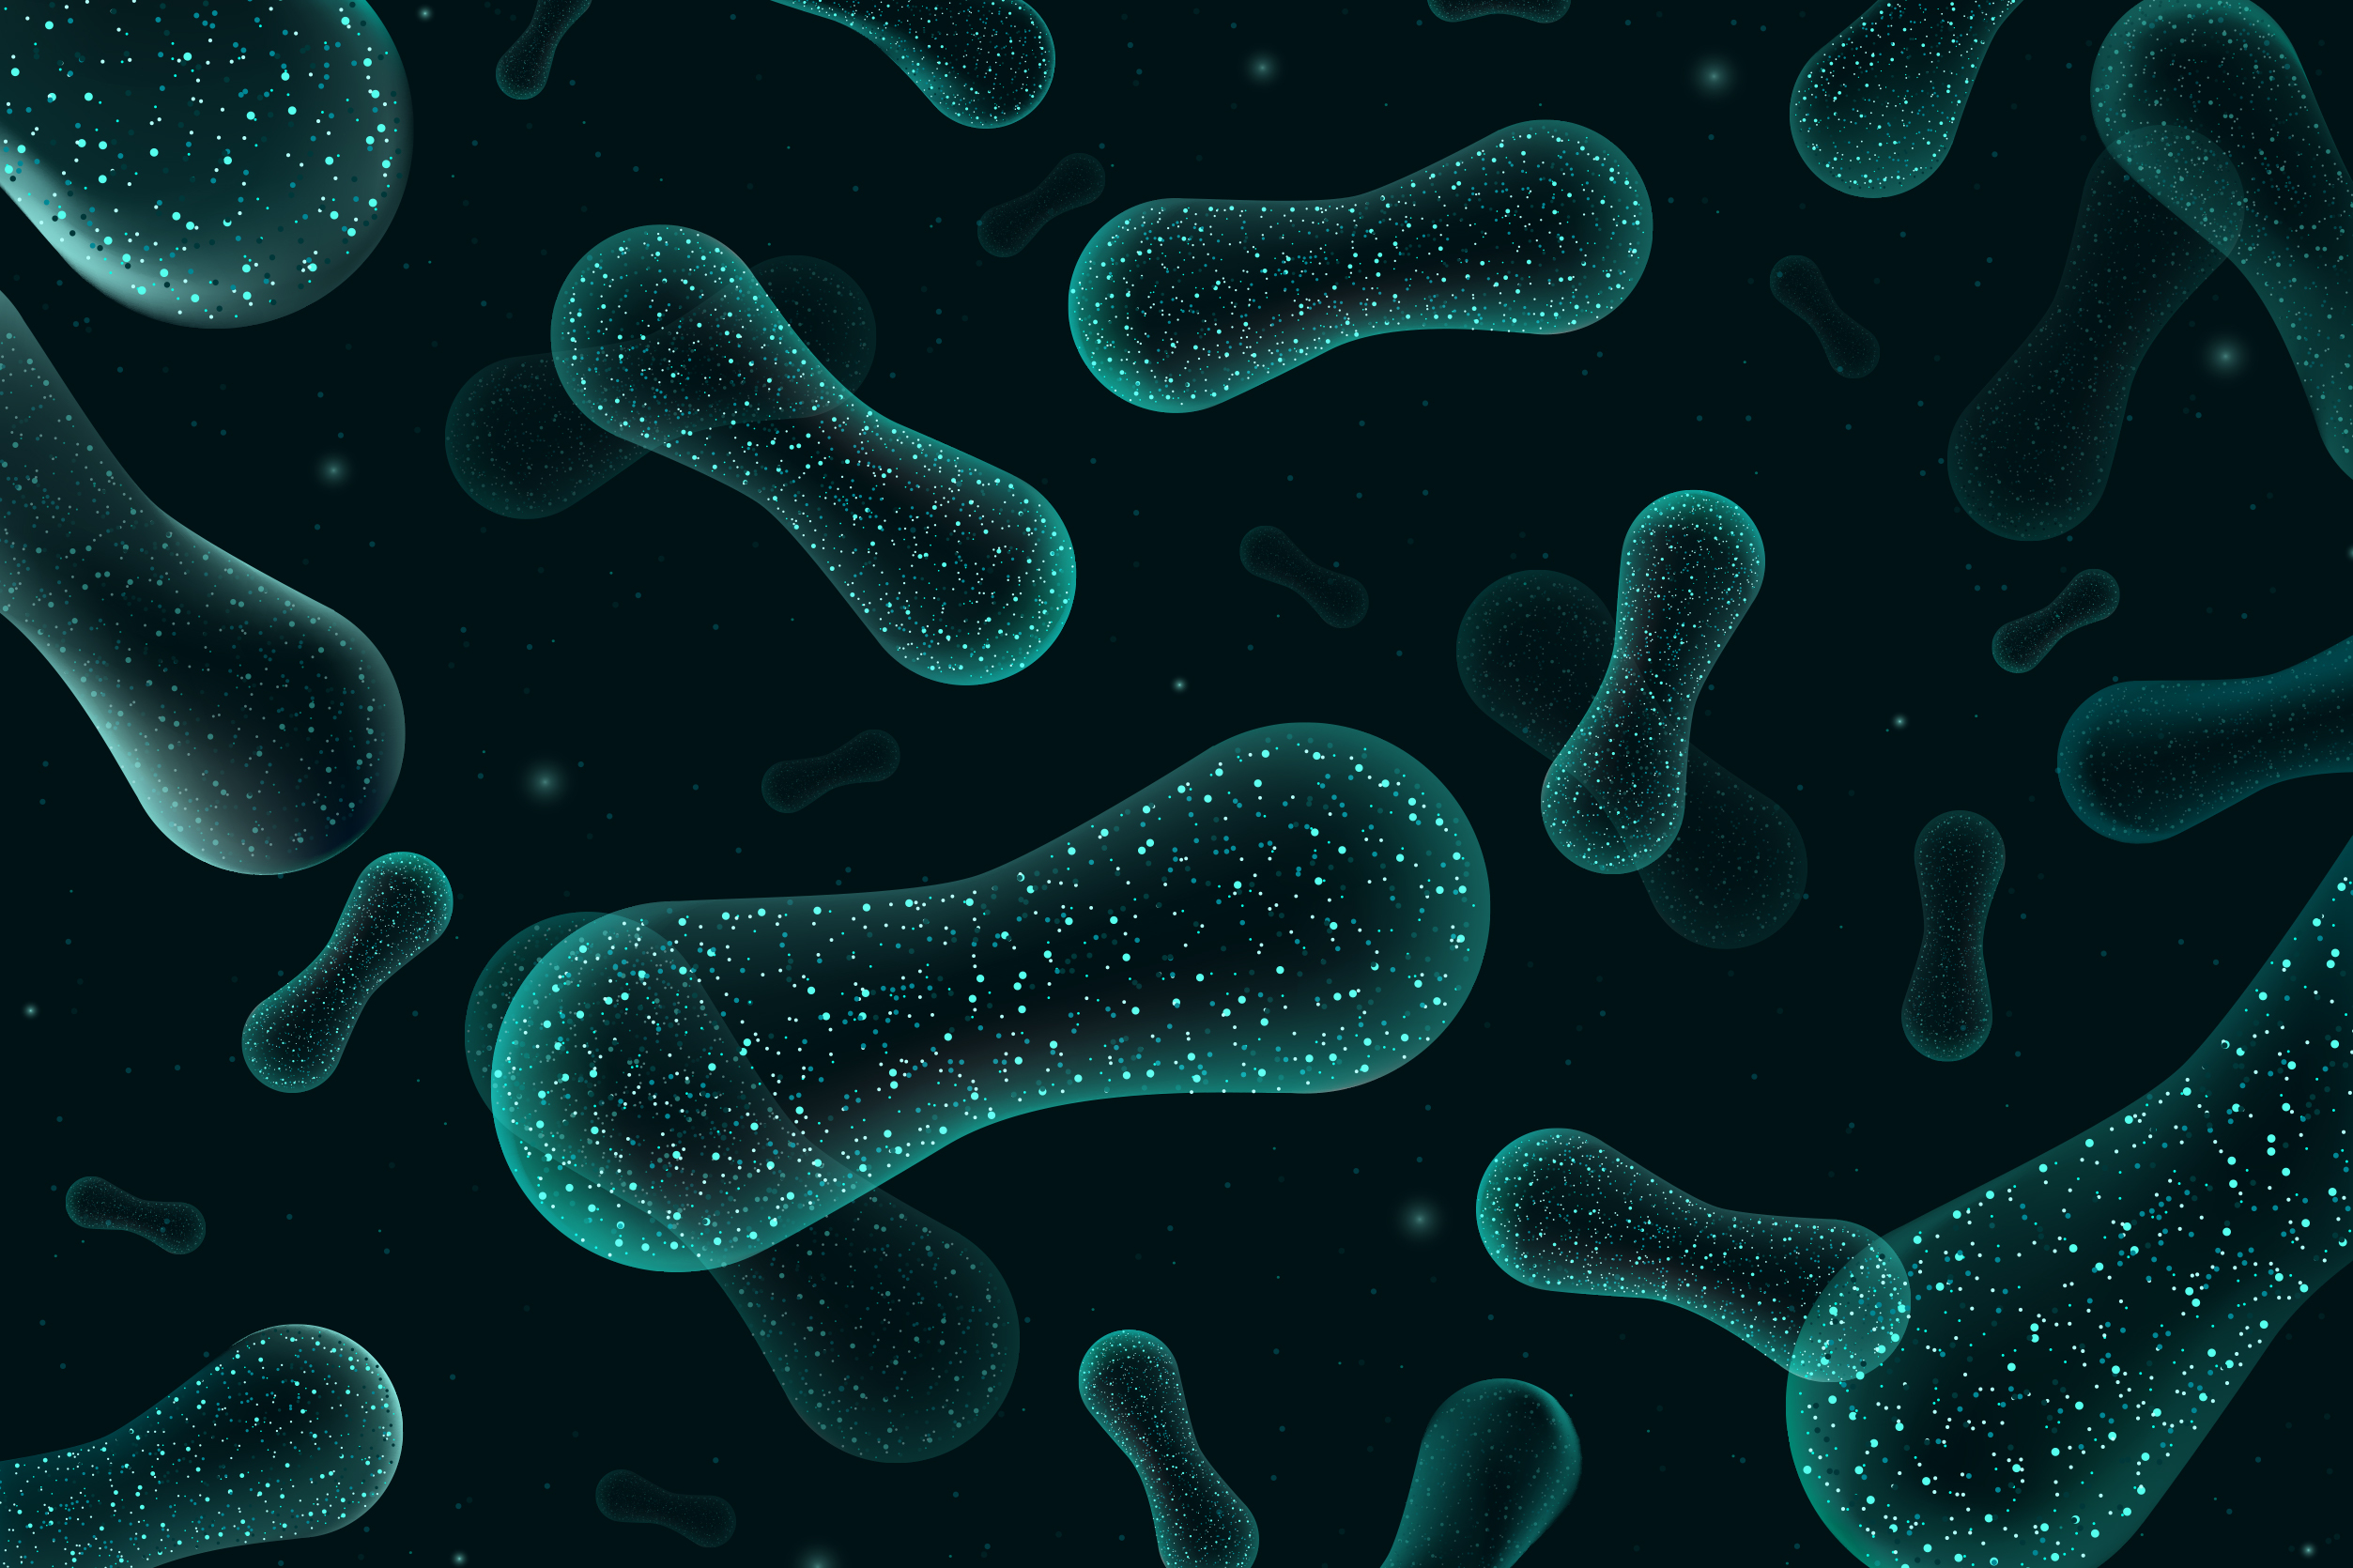 Turning microbiome research into a force for health